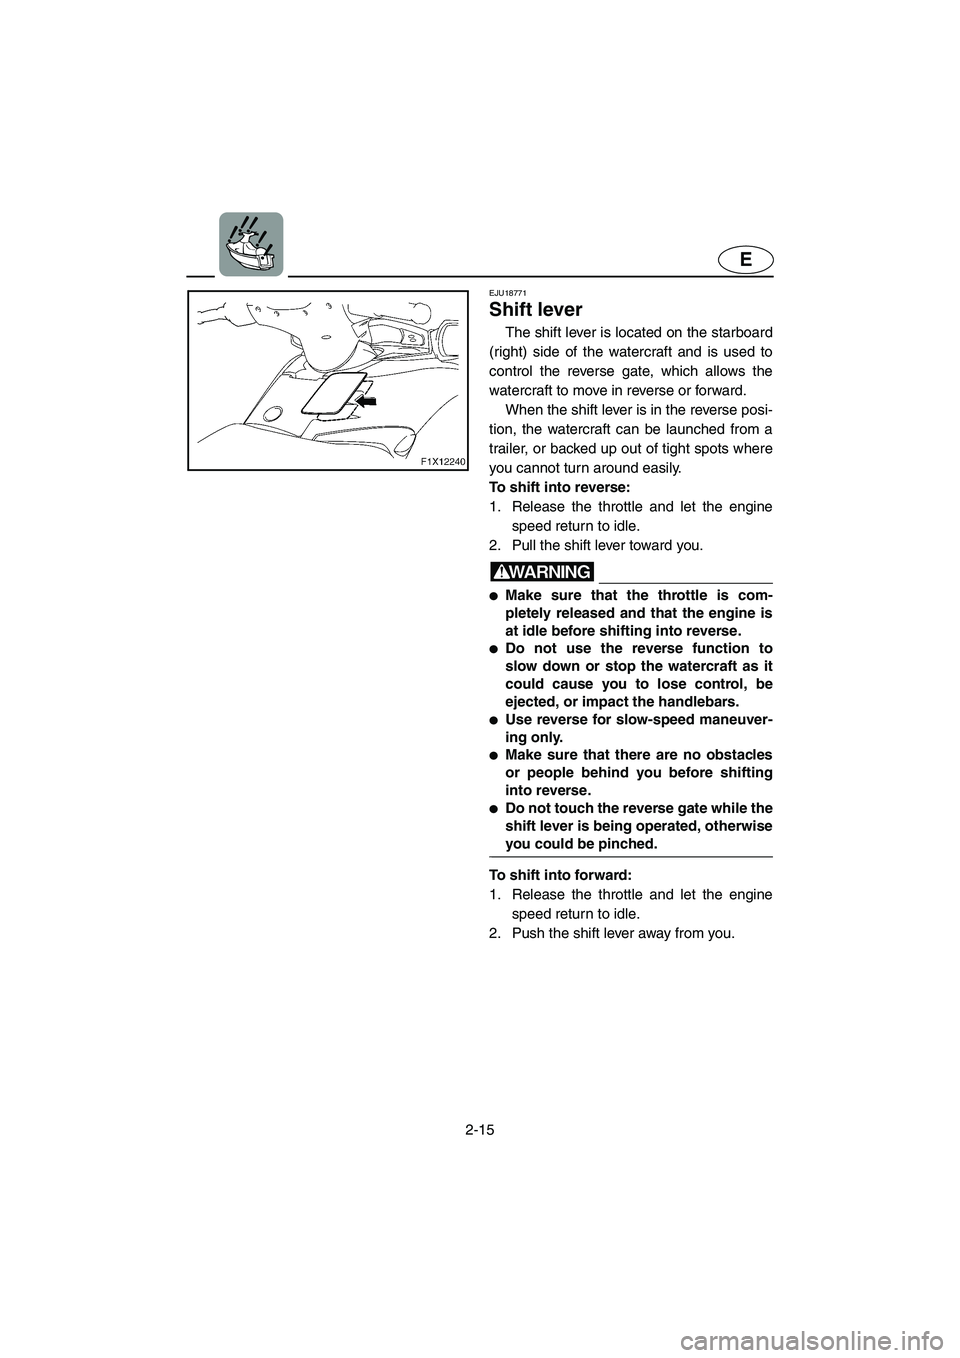 YAMAHA FX HO CRUISER 2006 Service Manual 2-15
E
EJU18771 
Shift lever
The shift lever is located on the starboard
(right) side of the watercraft and is used to
control the reverse gate, which allows the
watercraft to move in reverse or forwa